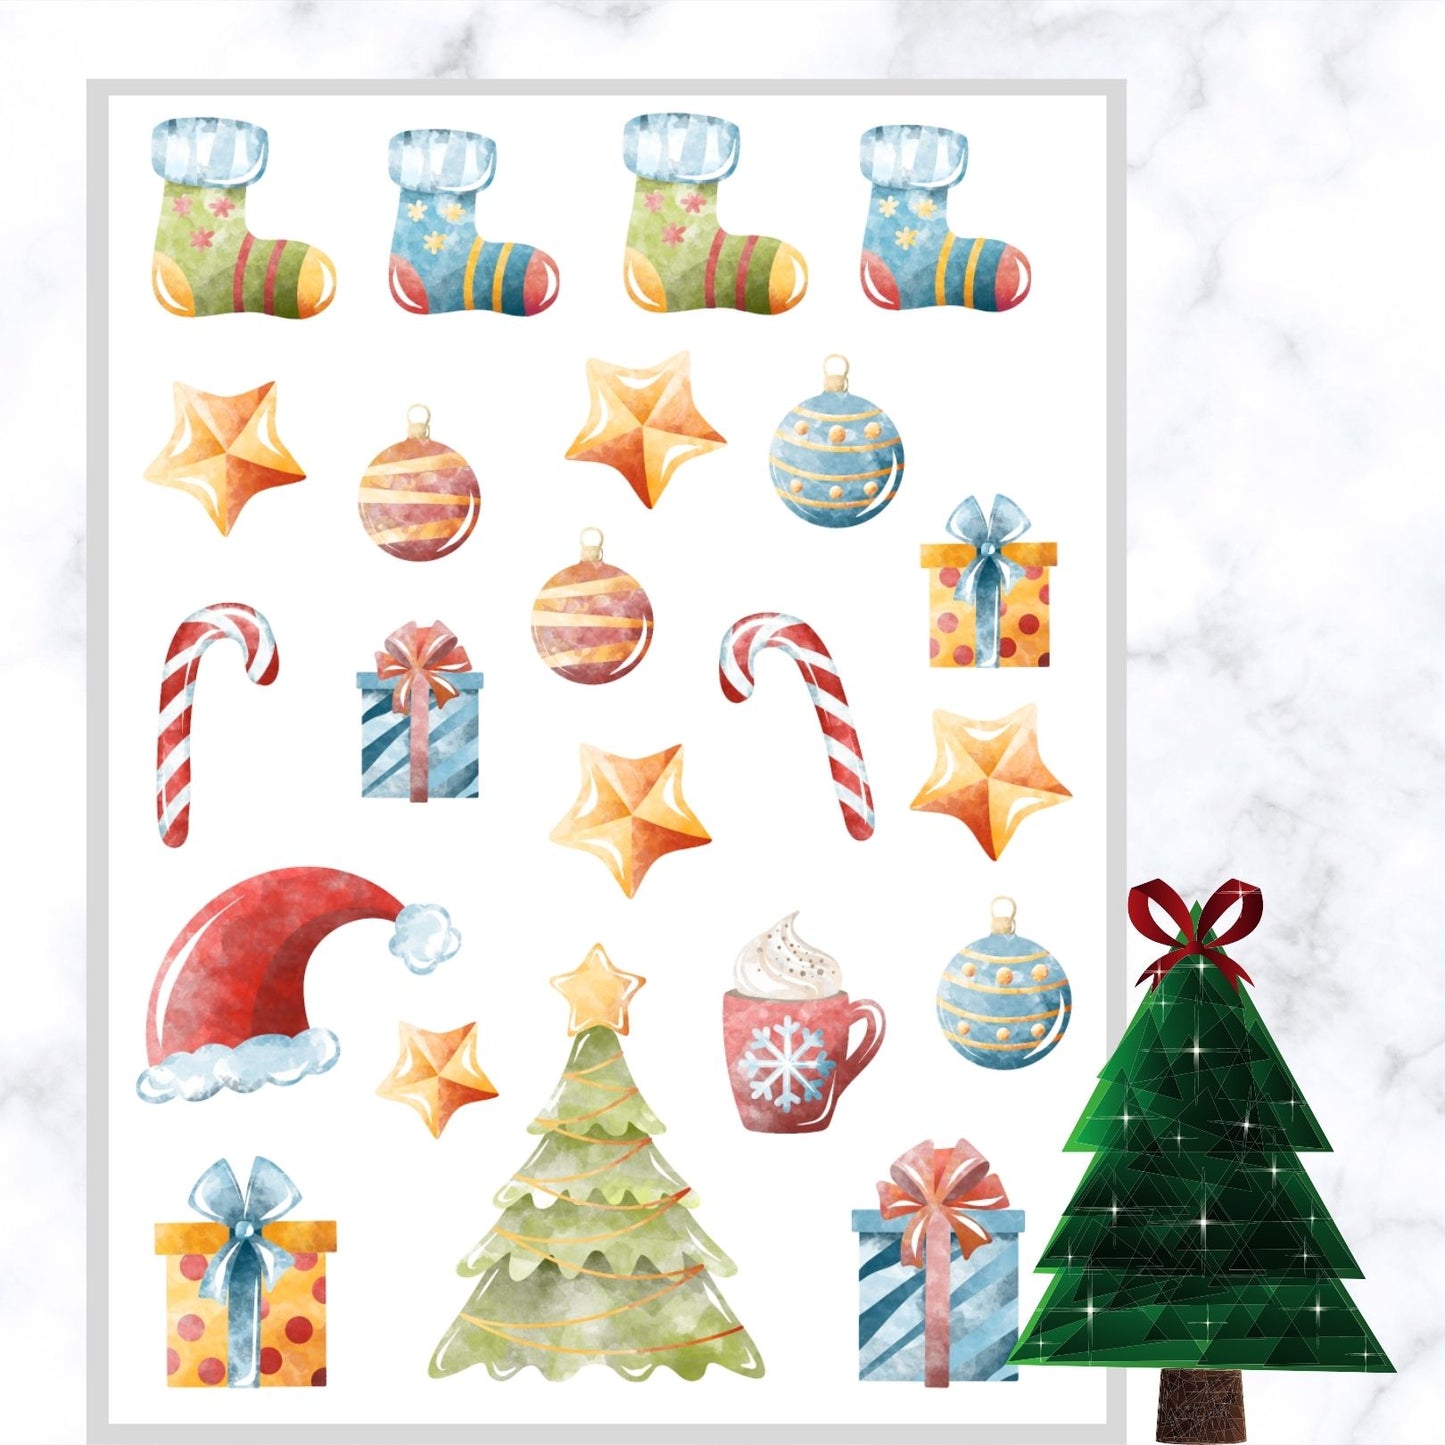 Watercolour Christmas Stickers